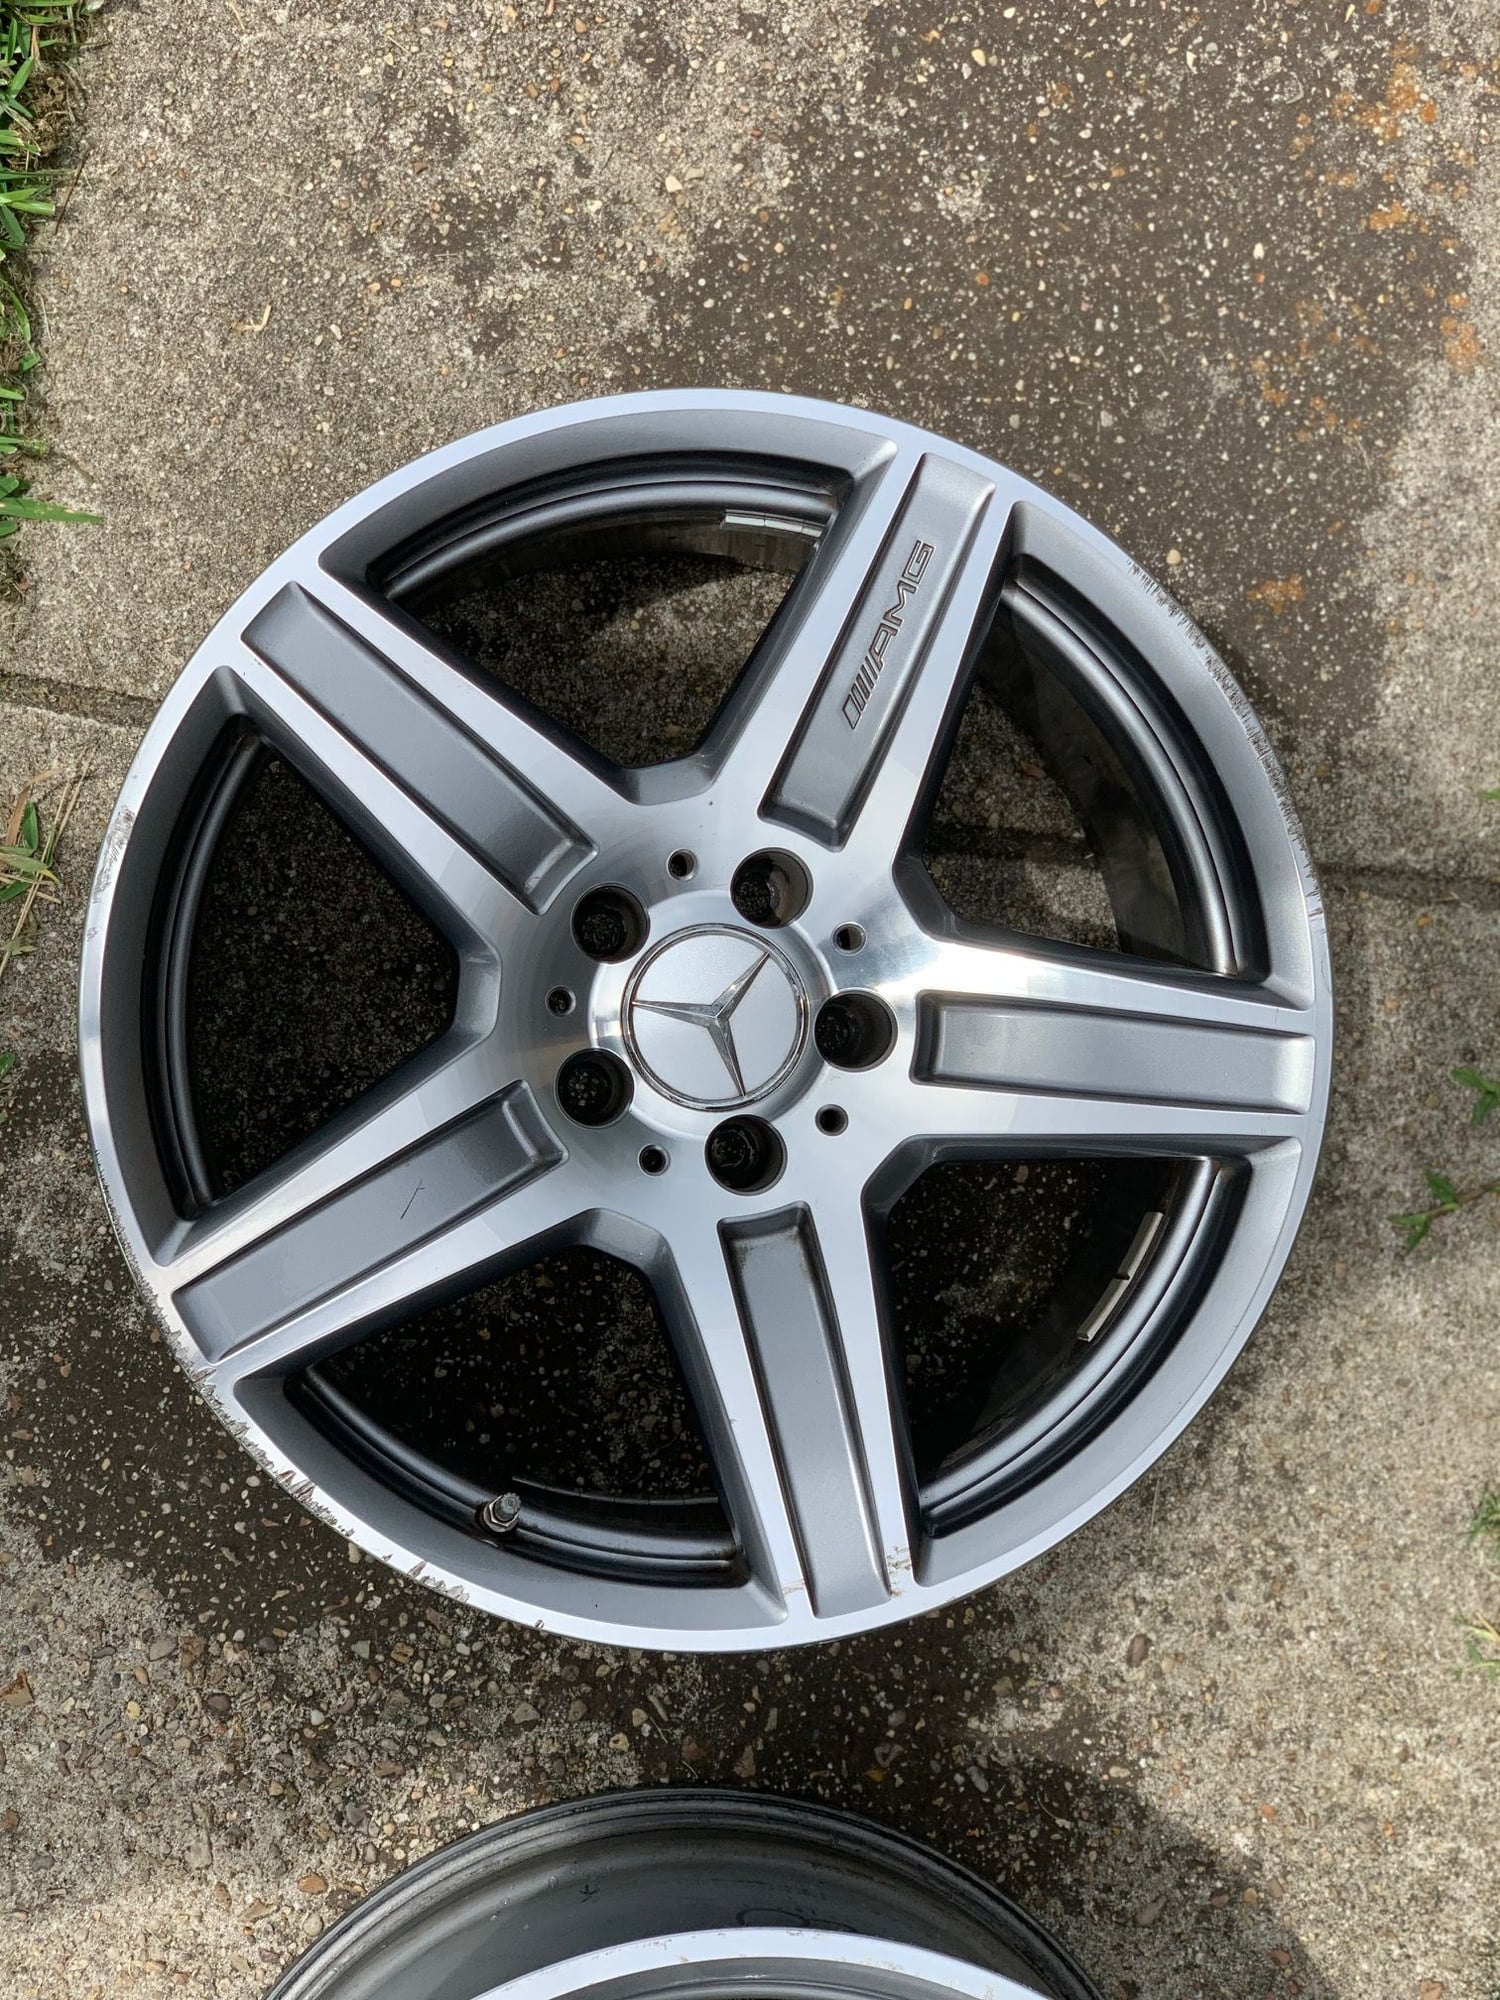 Wheels and Tires/Axles - FOR SALE: 4 OEM E63 Wheels/Rims 18x9 Et37 - Used - 2010 to 2014 Mercedes-Benz E63 AMG - 2010 to 2014 Mercedes-Benz E350 - 2010 to 2014 Mercedes-Benz E550 - Harvey, LA 70058, United States